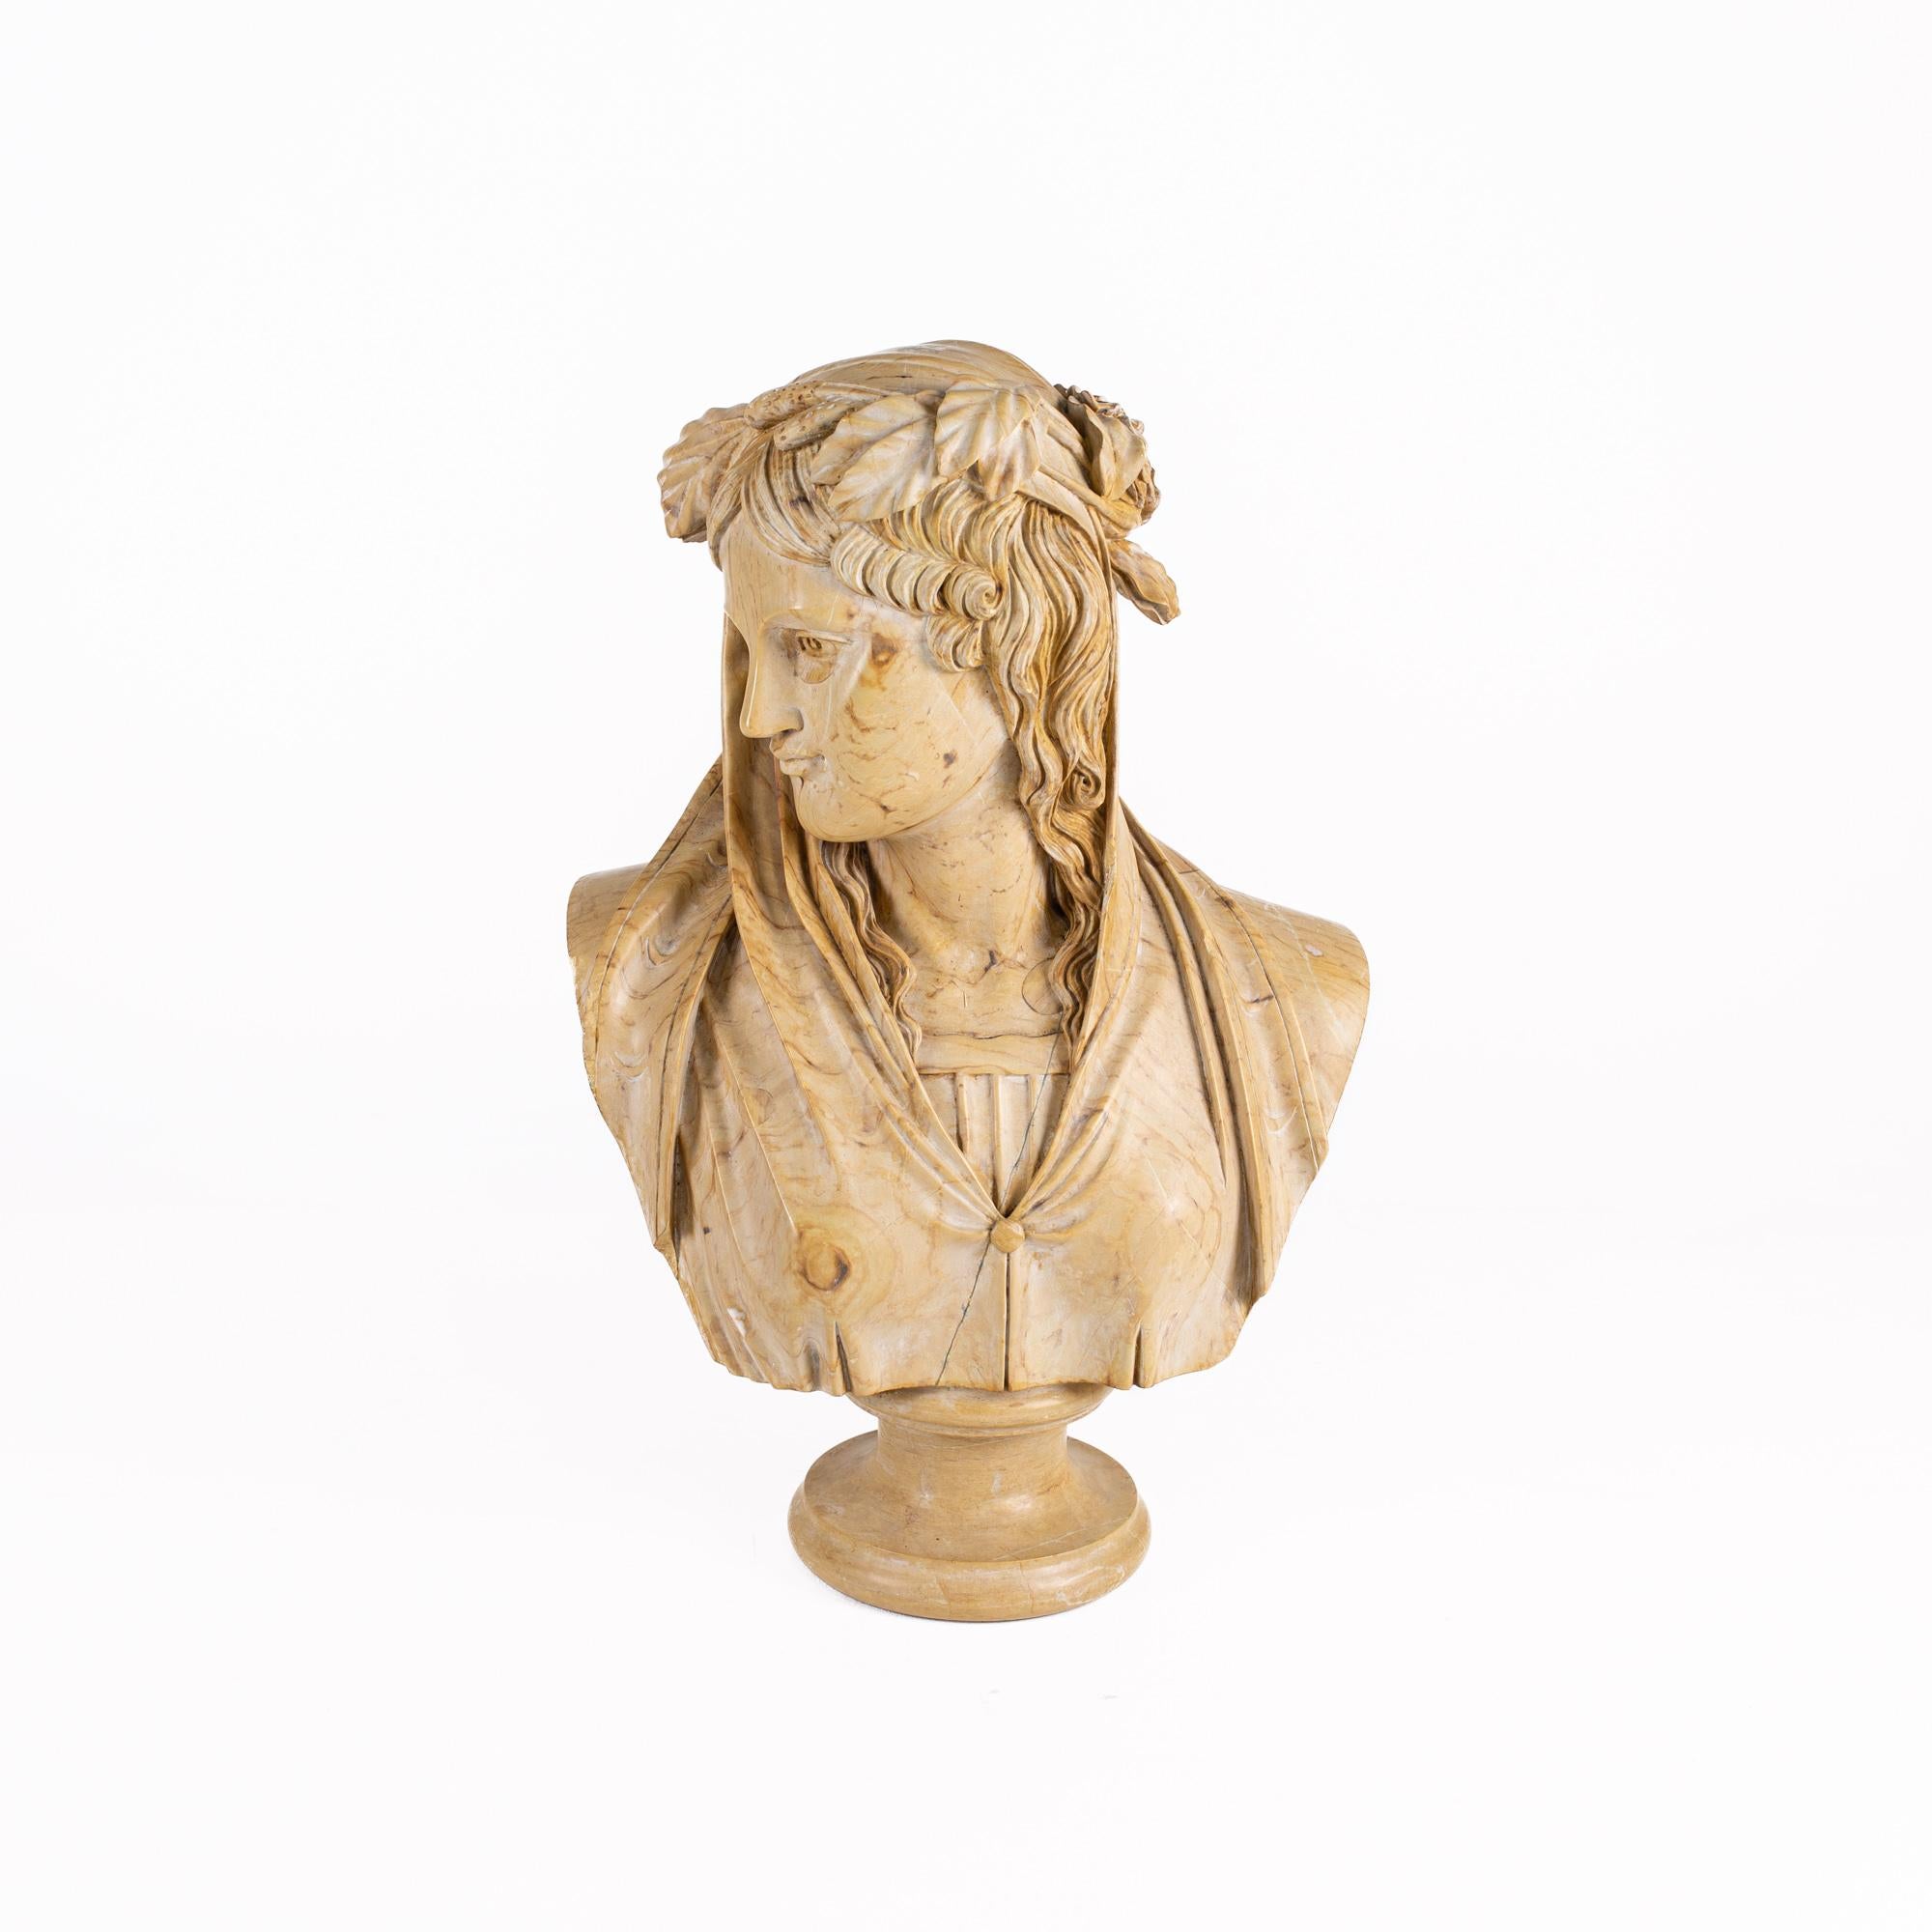 Roman style solid marble bust

This bust measures: 15 wide x 10 deep x 23 inches high

This piece is in Great Vintage Condition with minor marks, dents, and wear.

We take our photos in a controlled lighting studio to show as much detail as